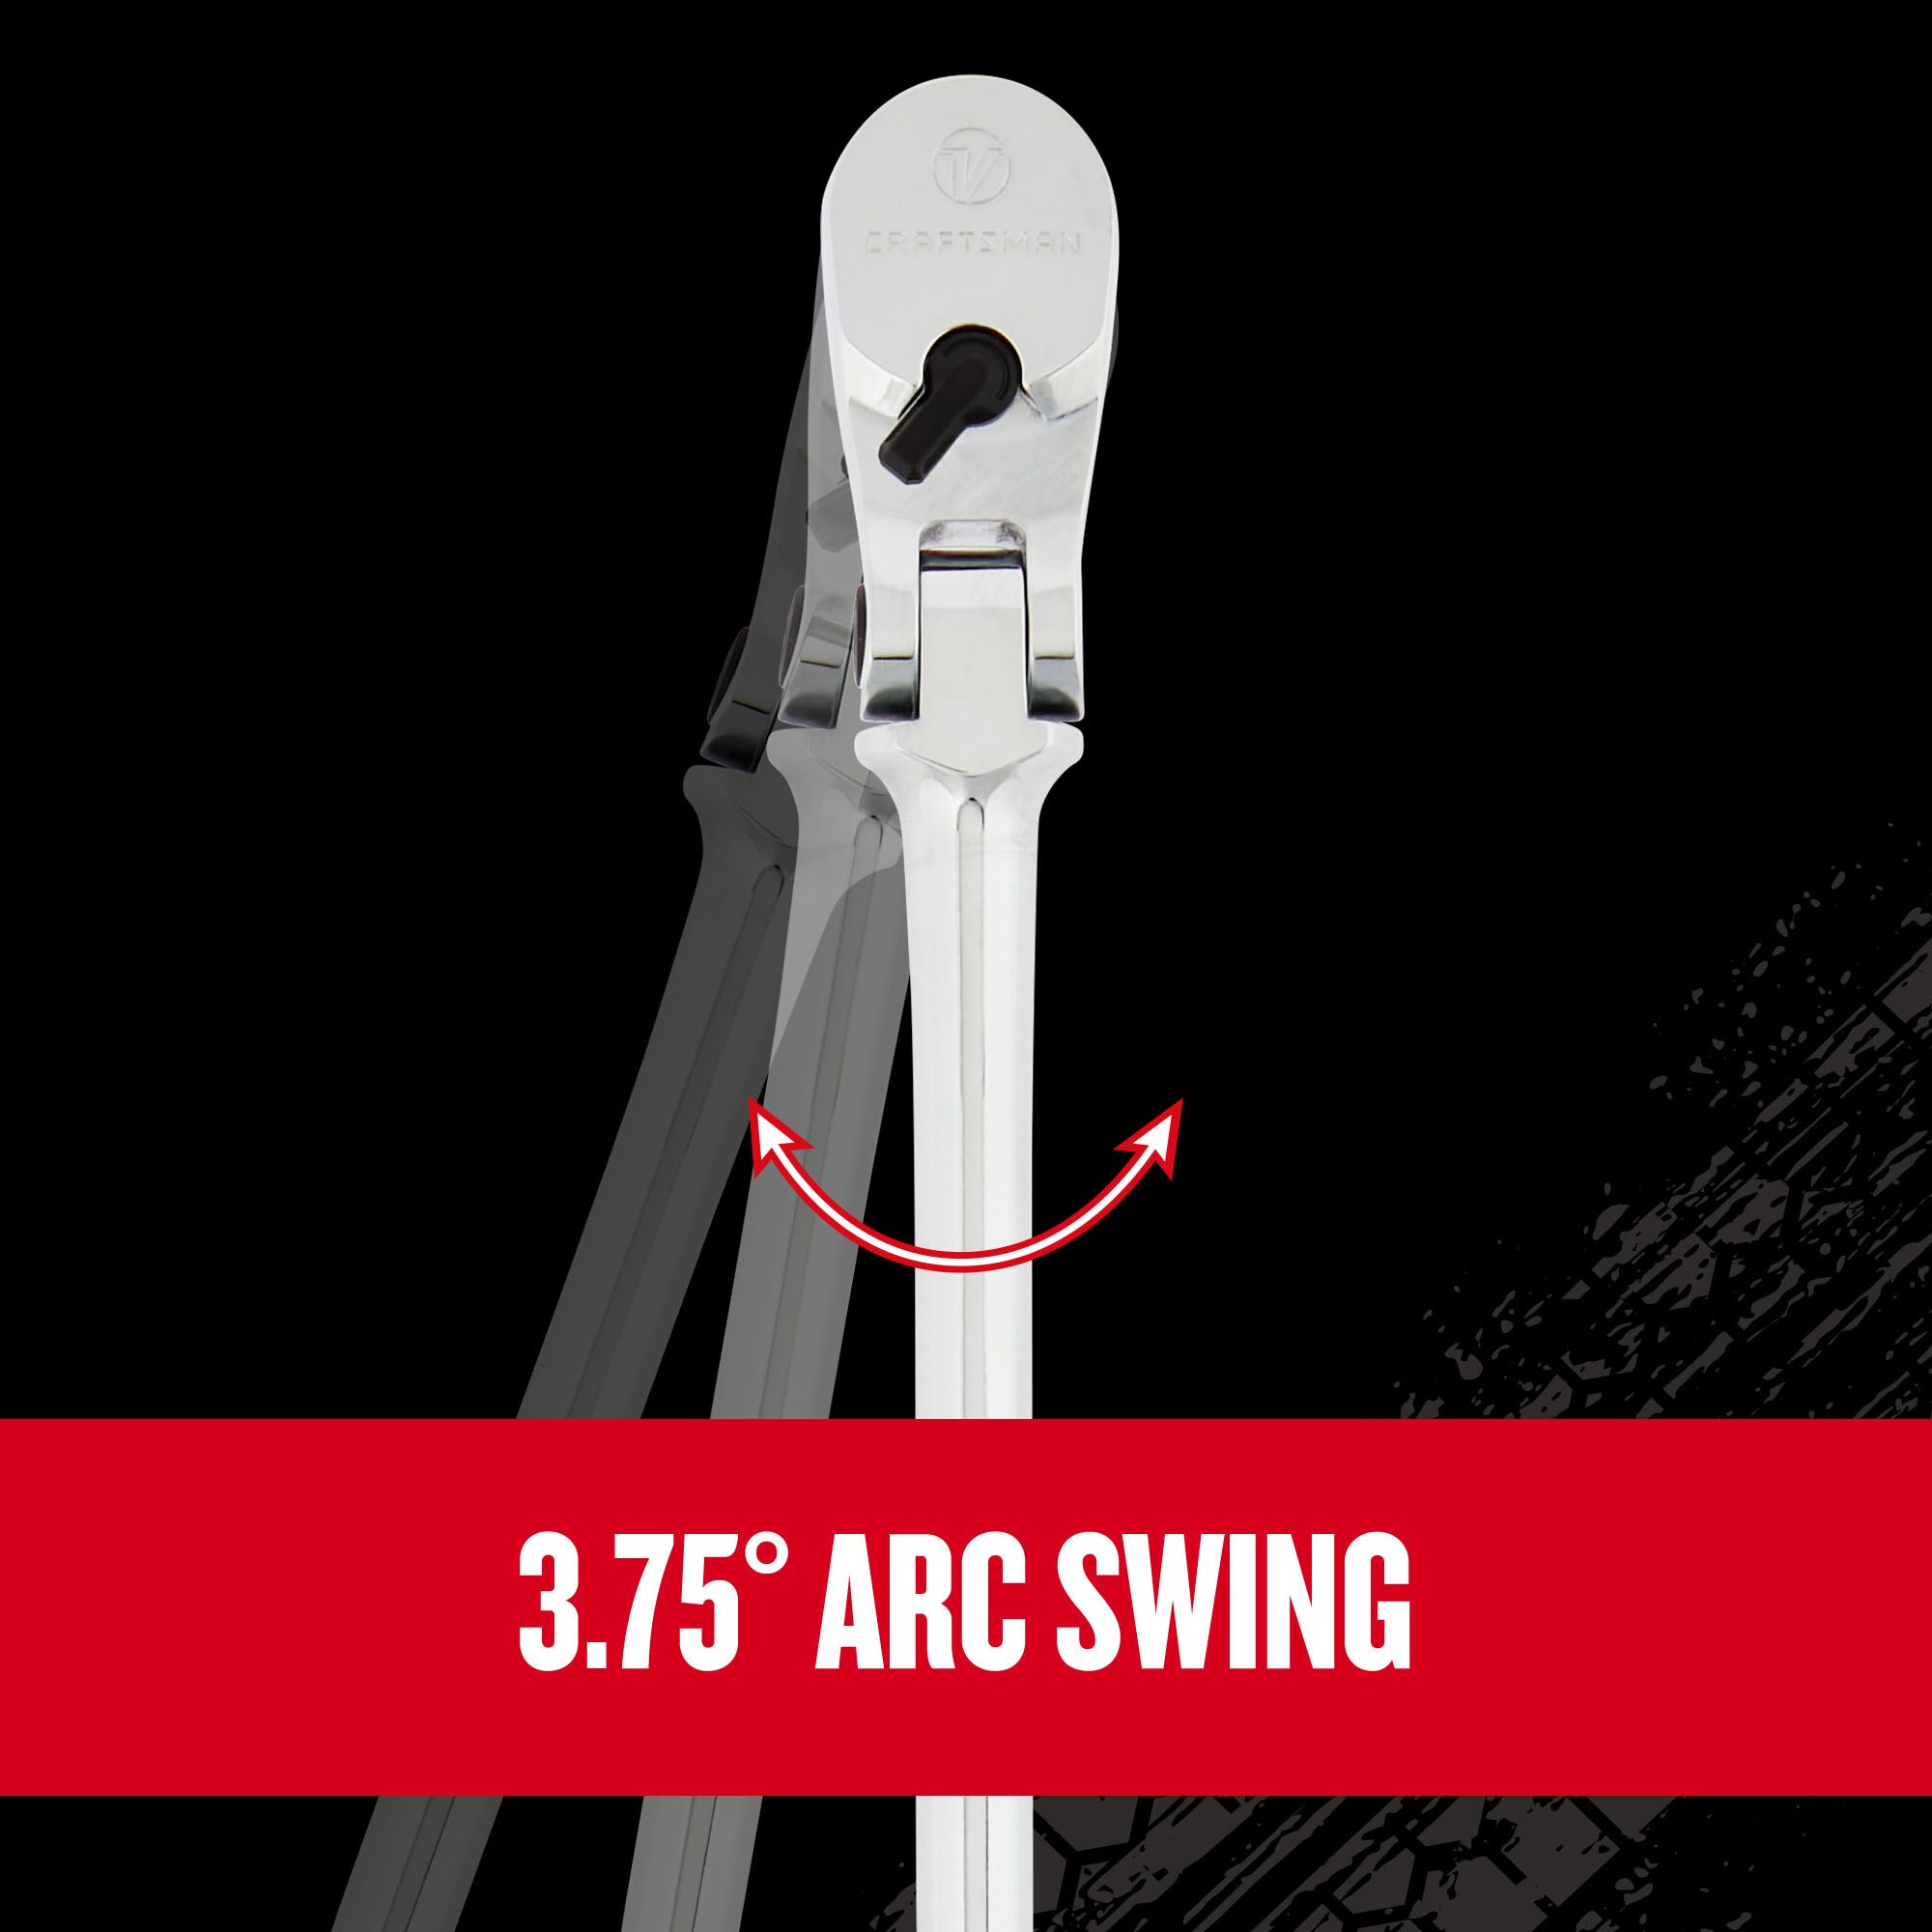 Graphic of CRAFTSMAN Ratchets highlighting product features